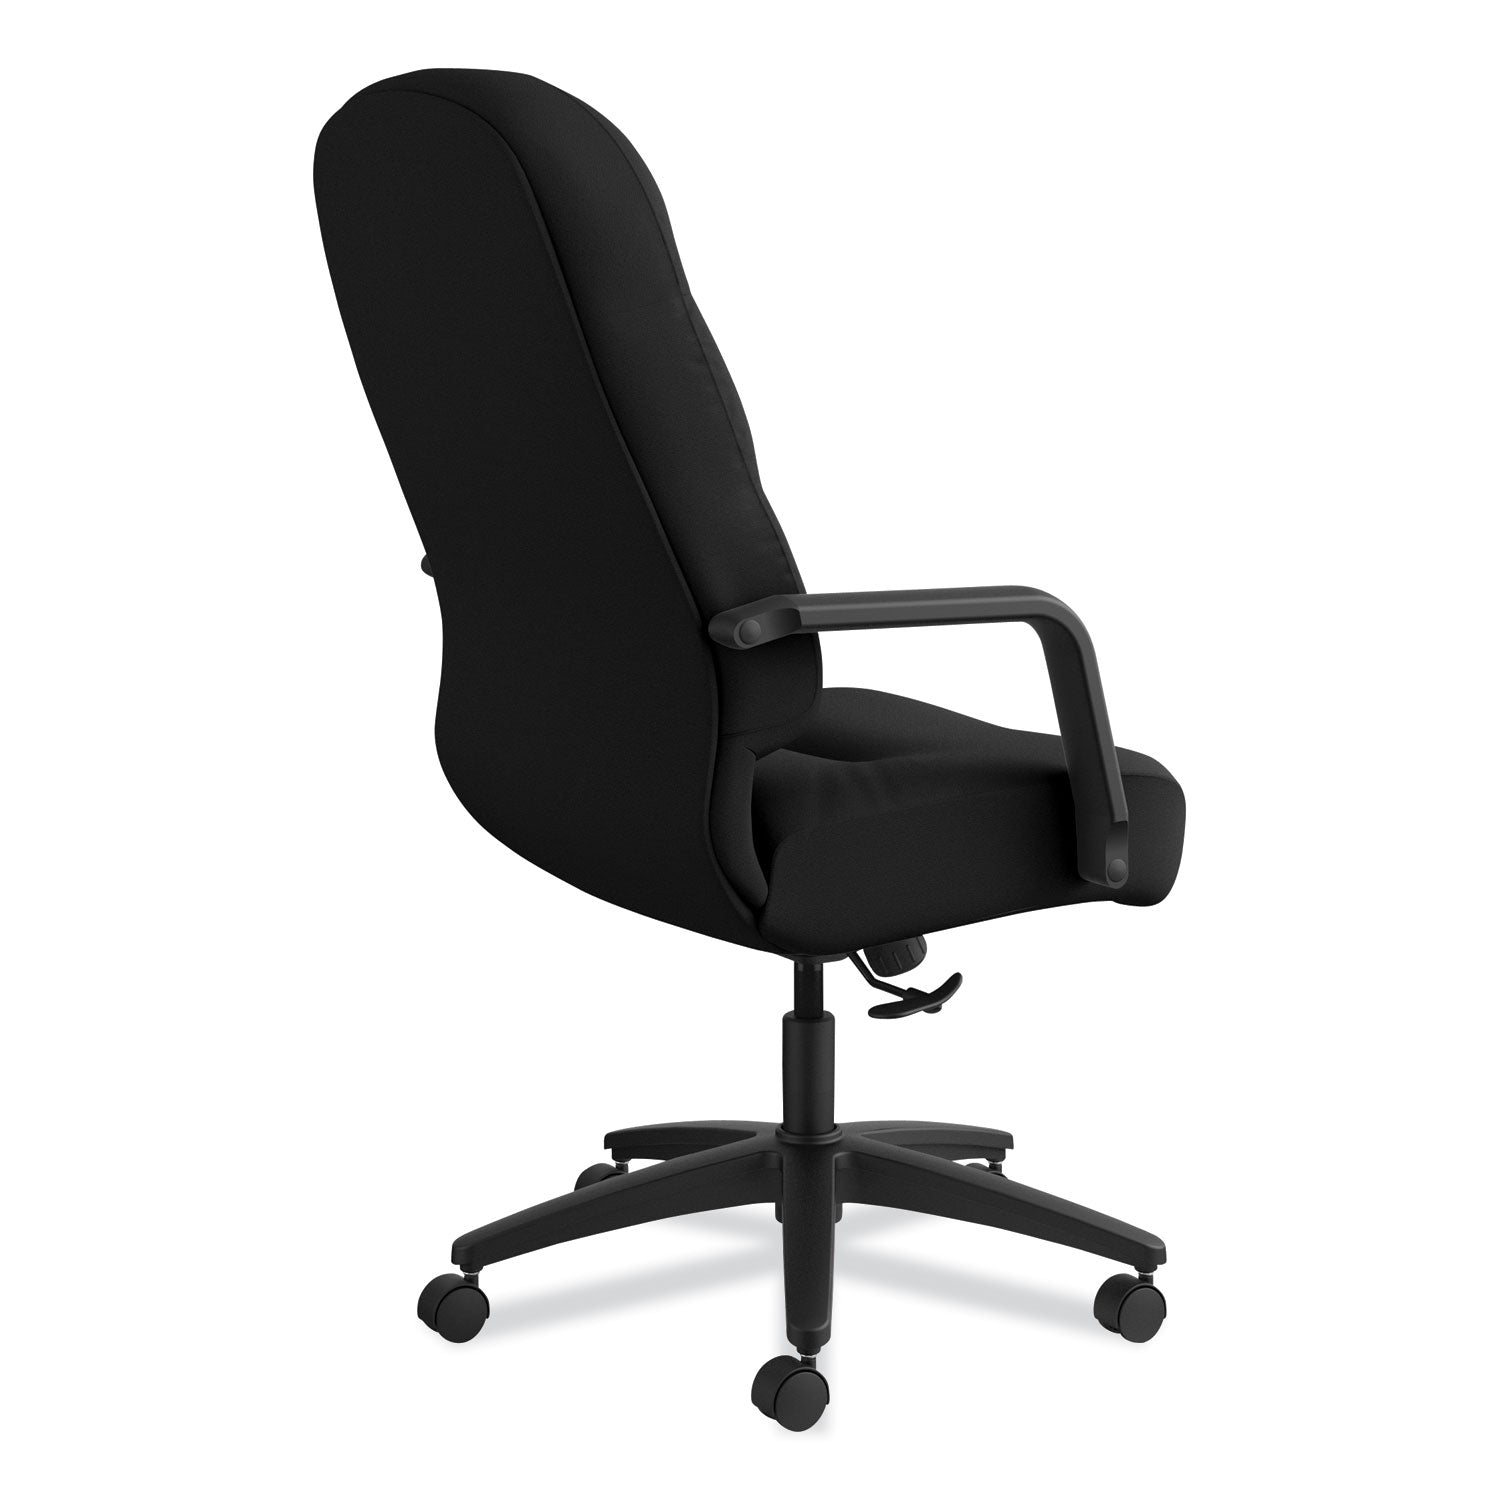 Pillow-Soft 2090 Series Executive High-Back Swivel/Tilt Chair, Supports Up to 300 lb, 17" to 21" Seat Height, Black - 5